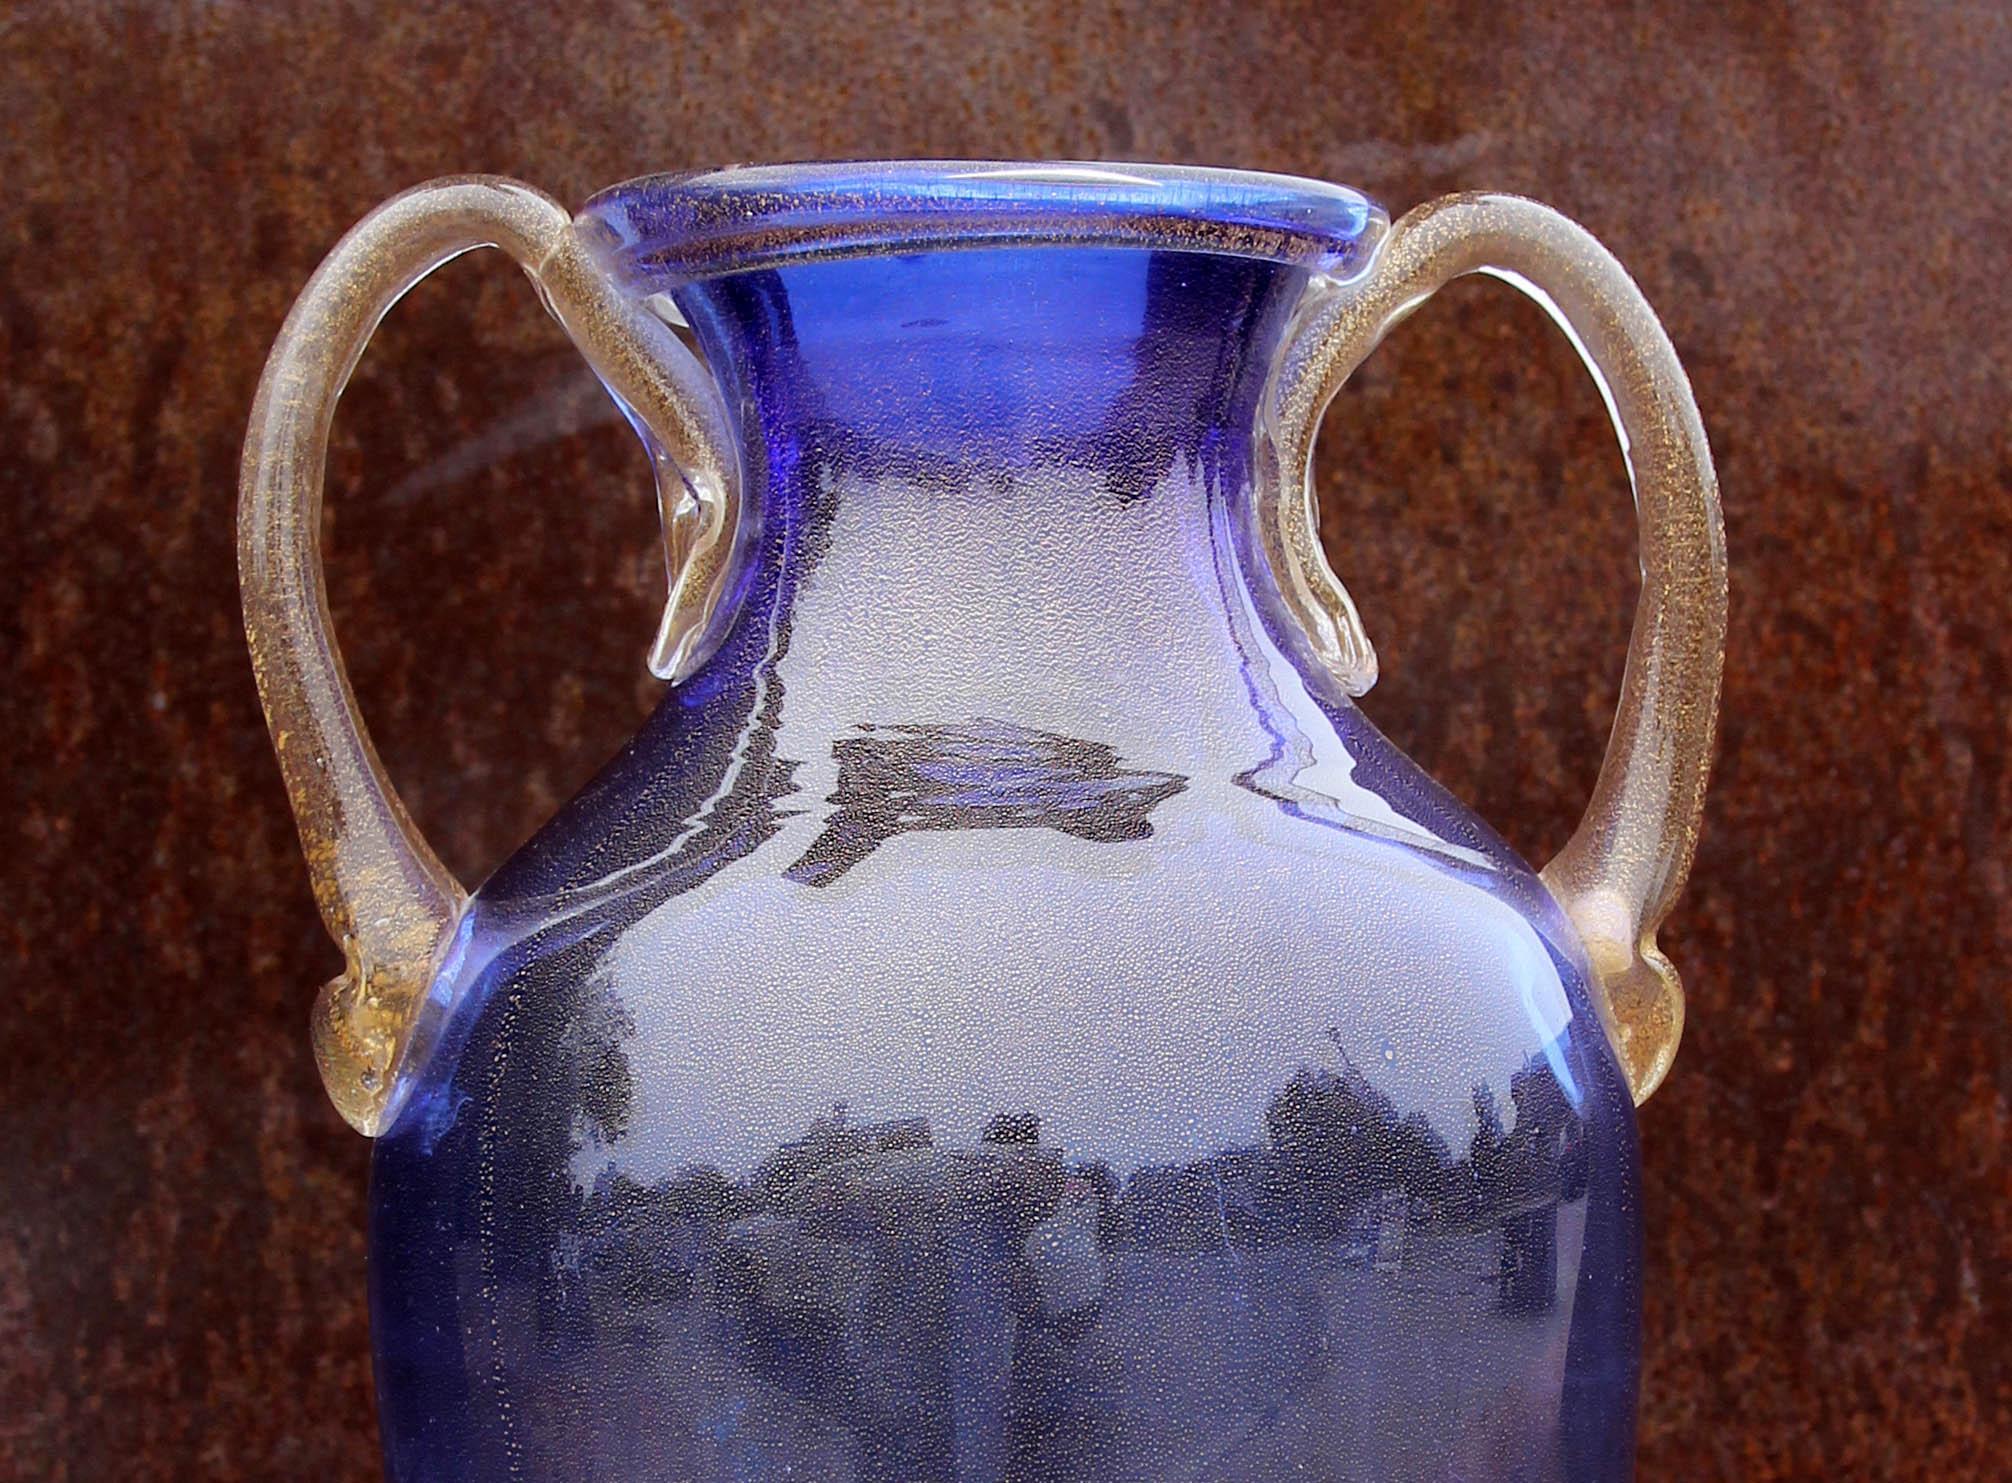 Murano blue glass two handle vase decorated with gold fleck interior. Amphora form.